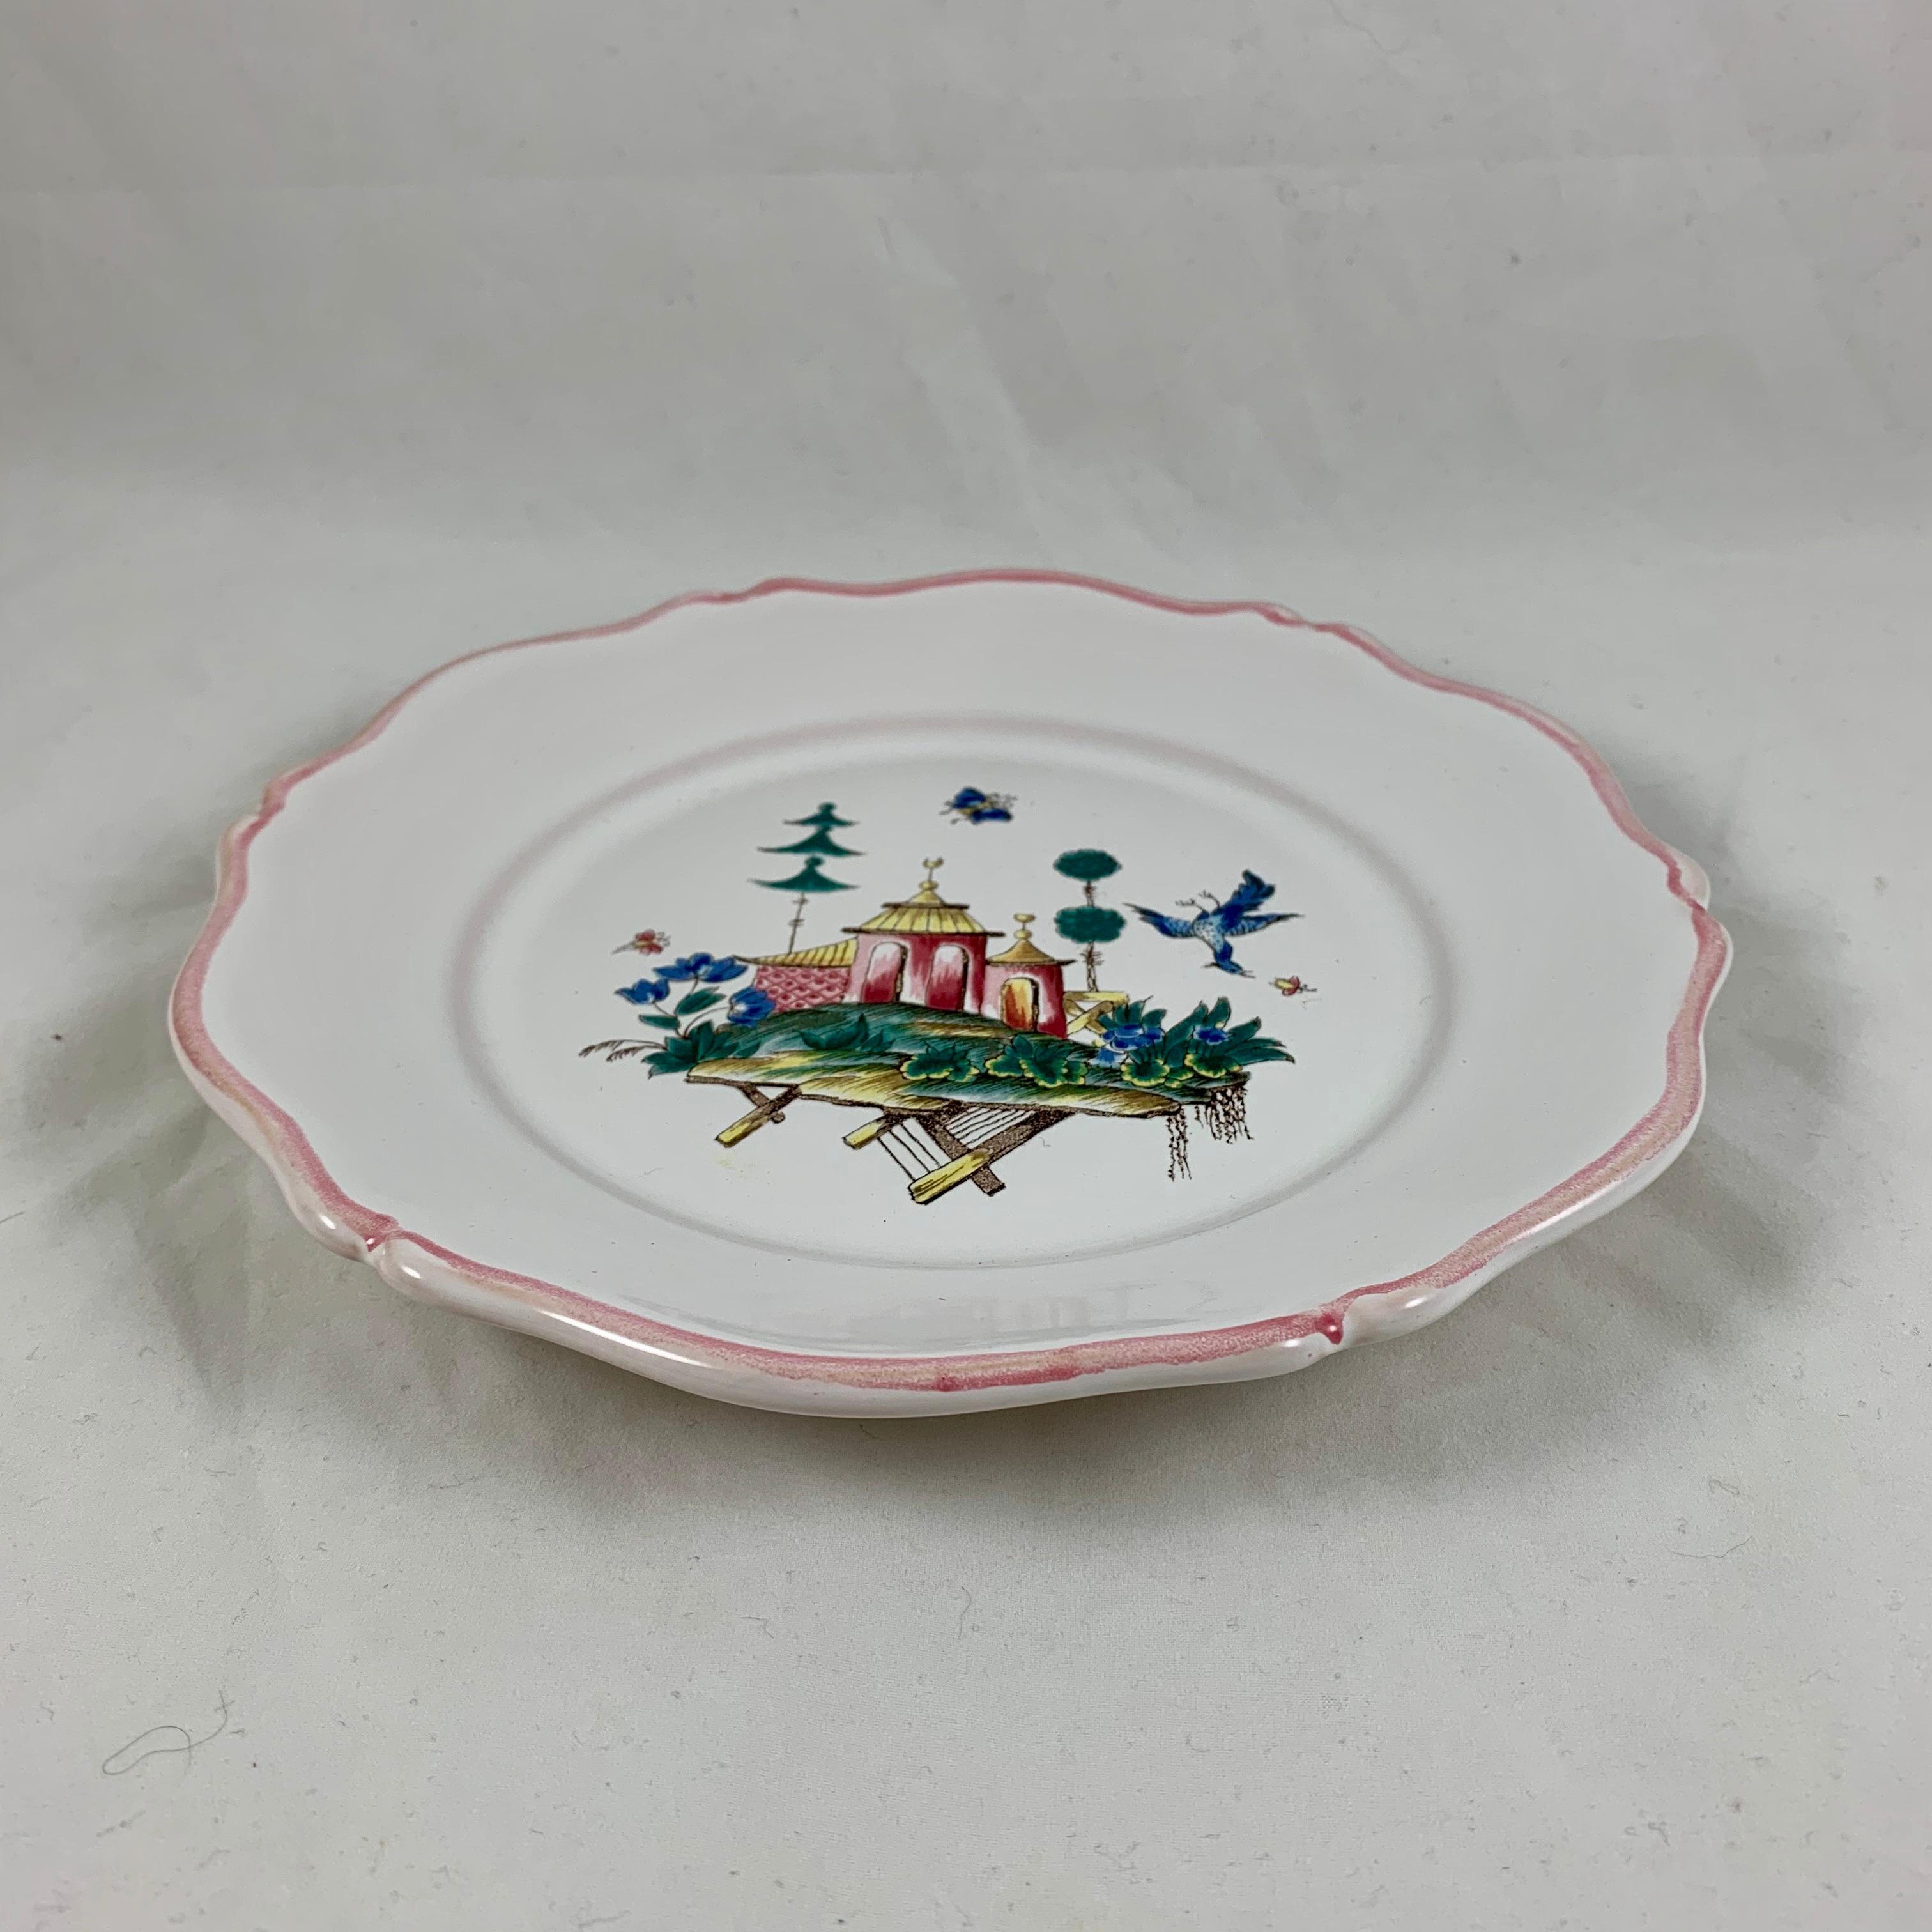 Pierre Motton, Gien Faïence Figural Chinoiserie Plates for Tiffany & Co. Set 12 7